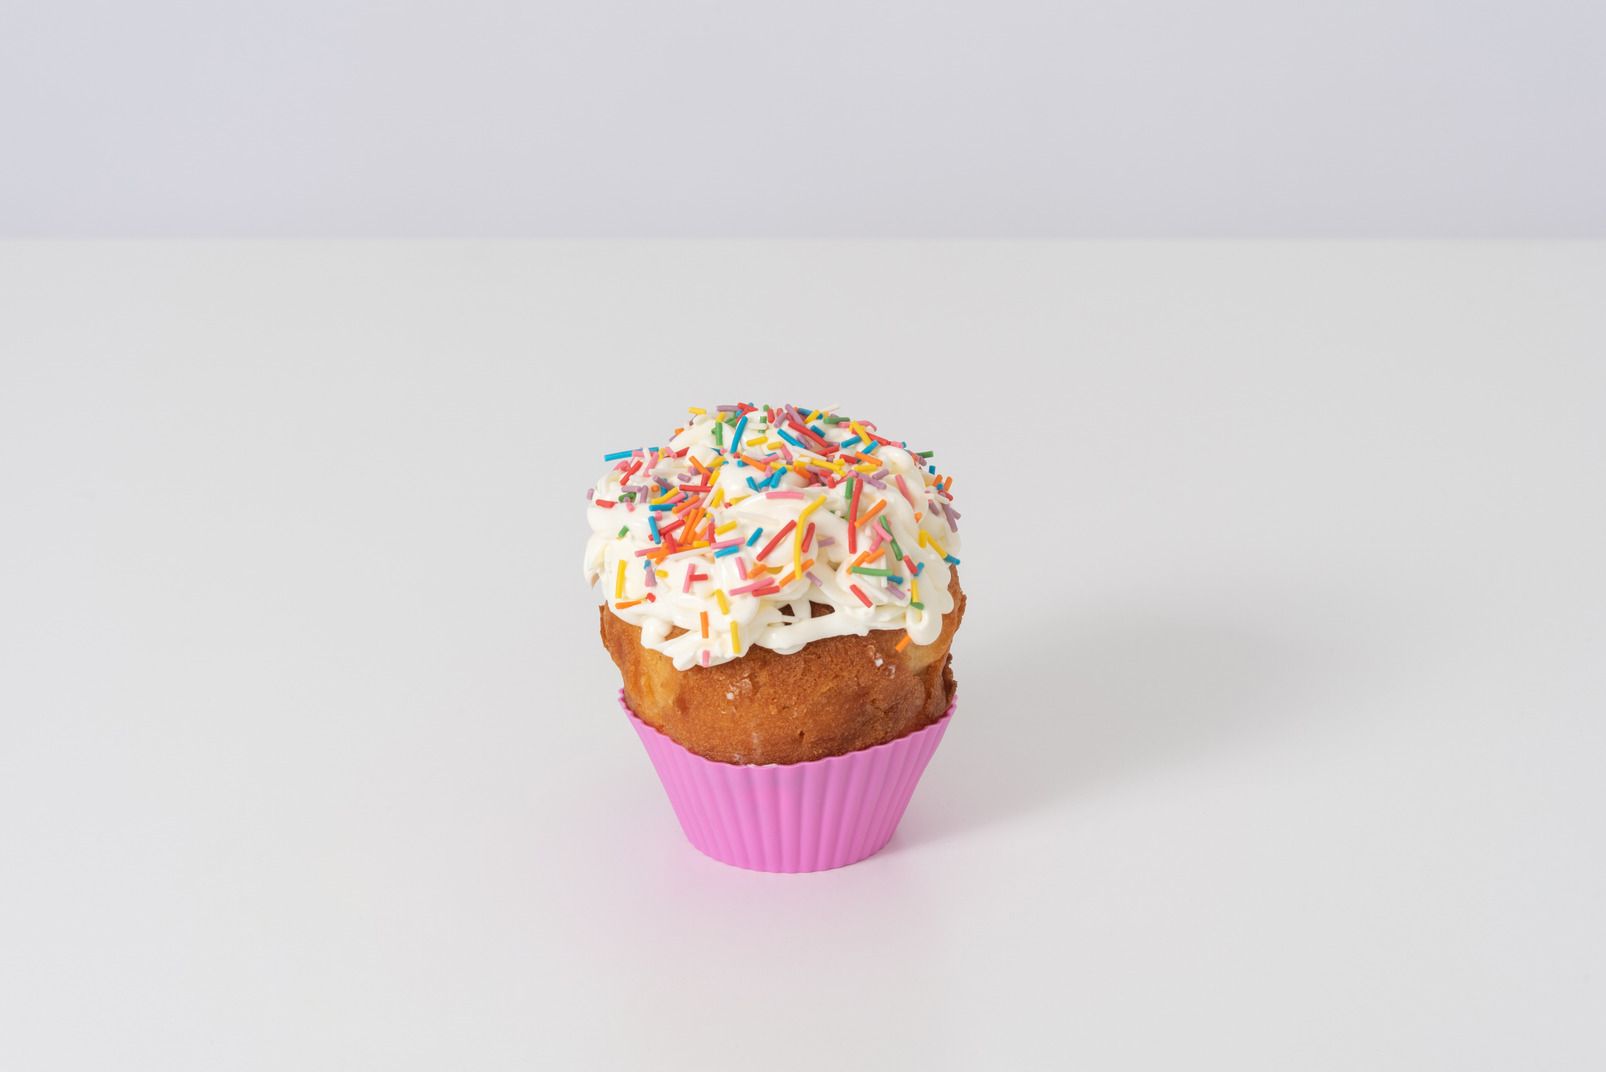 Cupcake on a white background